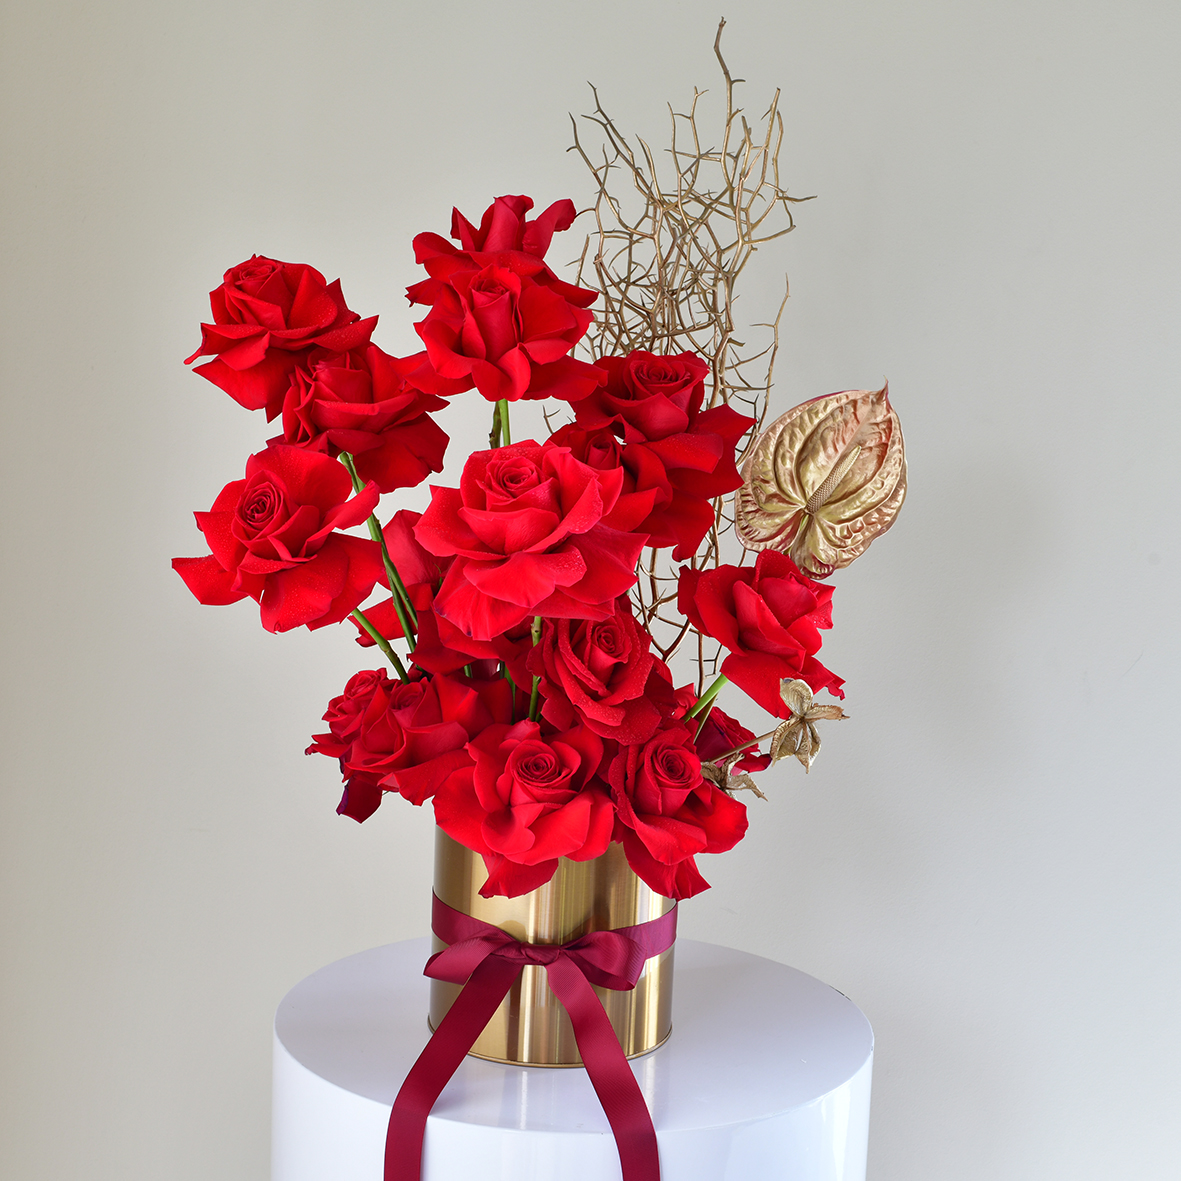 Red Roses in a Vase Sydney Delivery - Valentine's Day Special